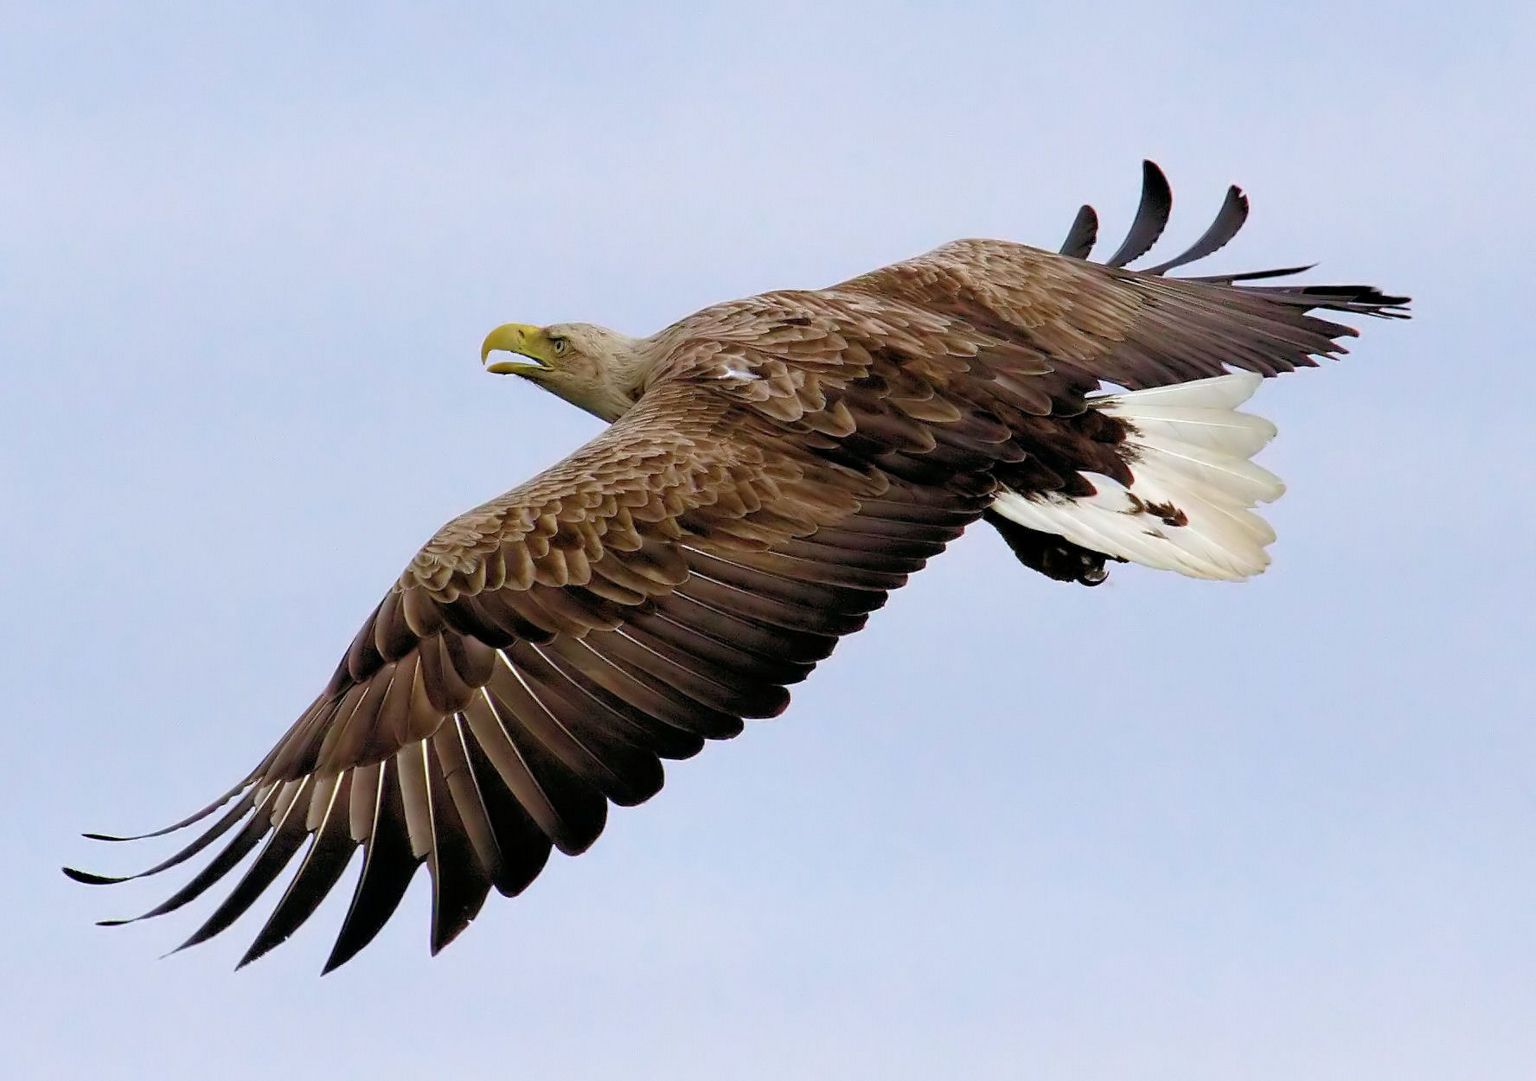 A white-tailed eagle in flight